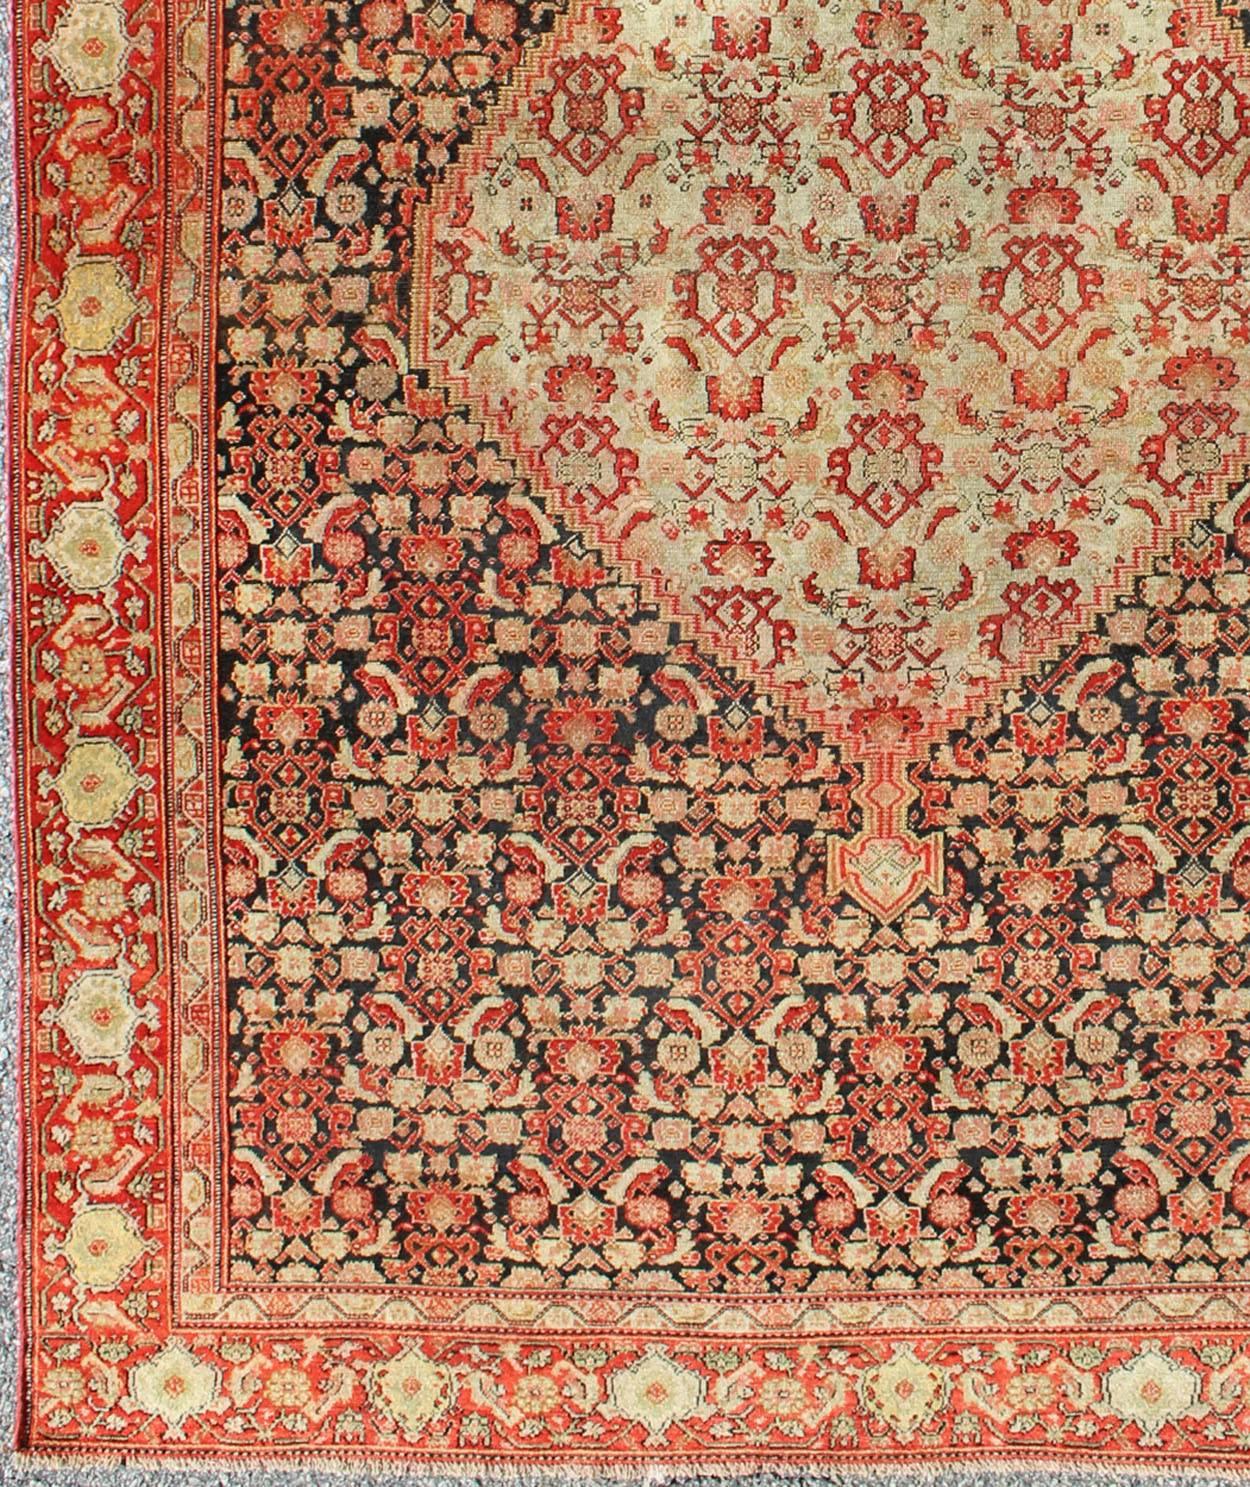 Antique Persian Senneh rug with unique medallion and all-over design, Keivan Woven Arts/ rug 16-0503, country of origin / type: Iran / Senneh, circa 1890

This incredibly finely woven antique Persian Senneh rug was handwoven around 1890 and bears